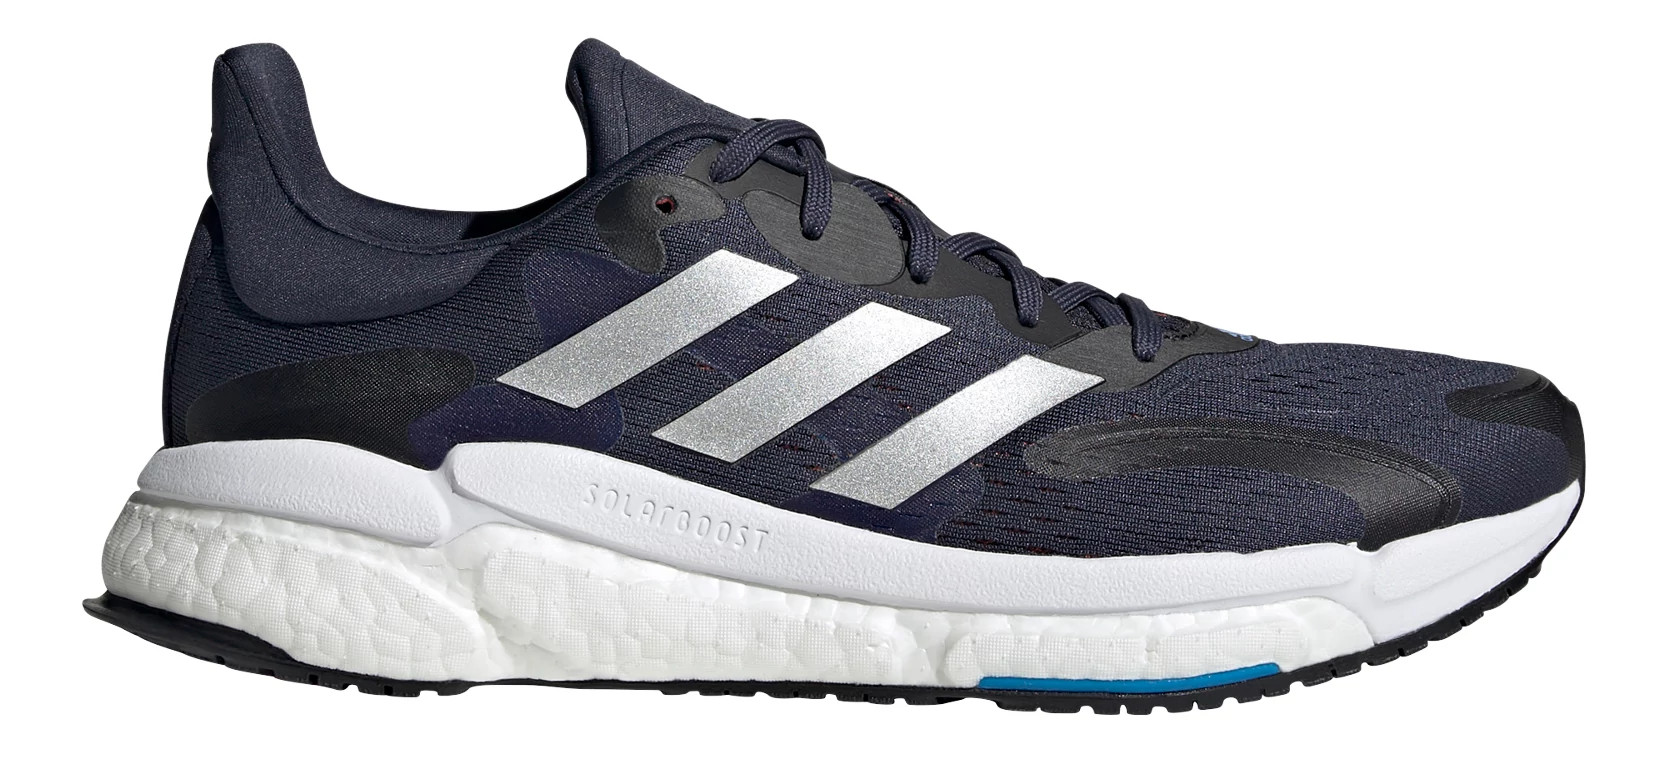 Adidas Solarboost After 500 miles: A Durable Dependable Daily : r